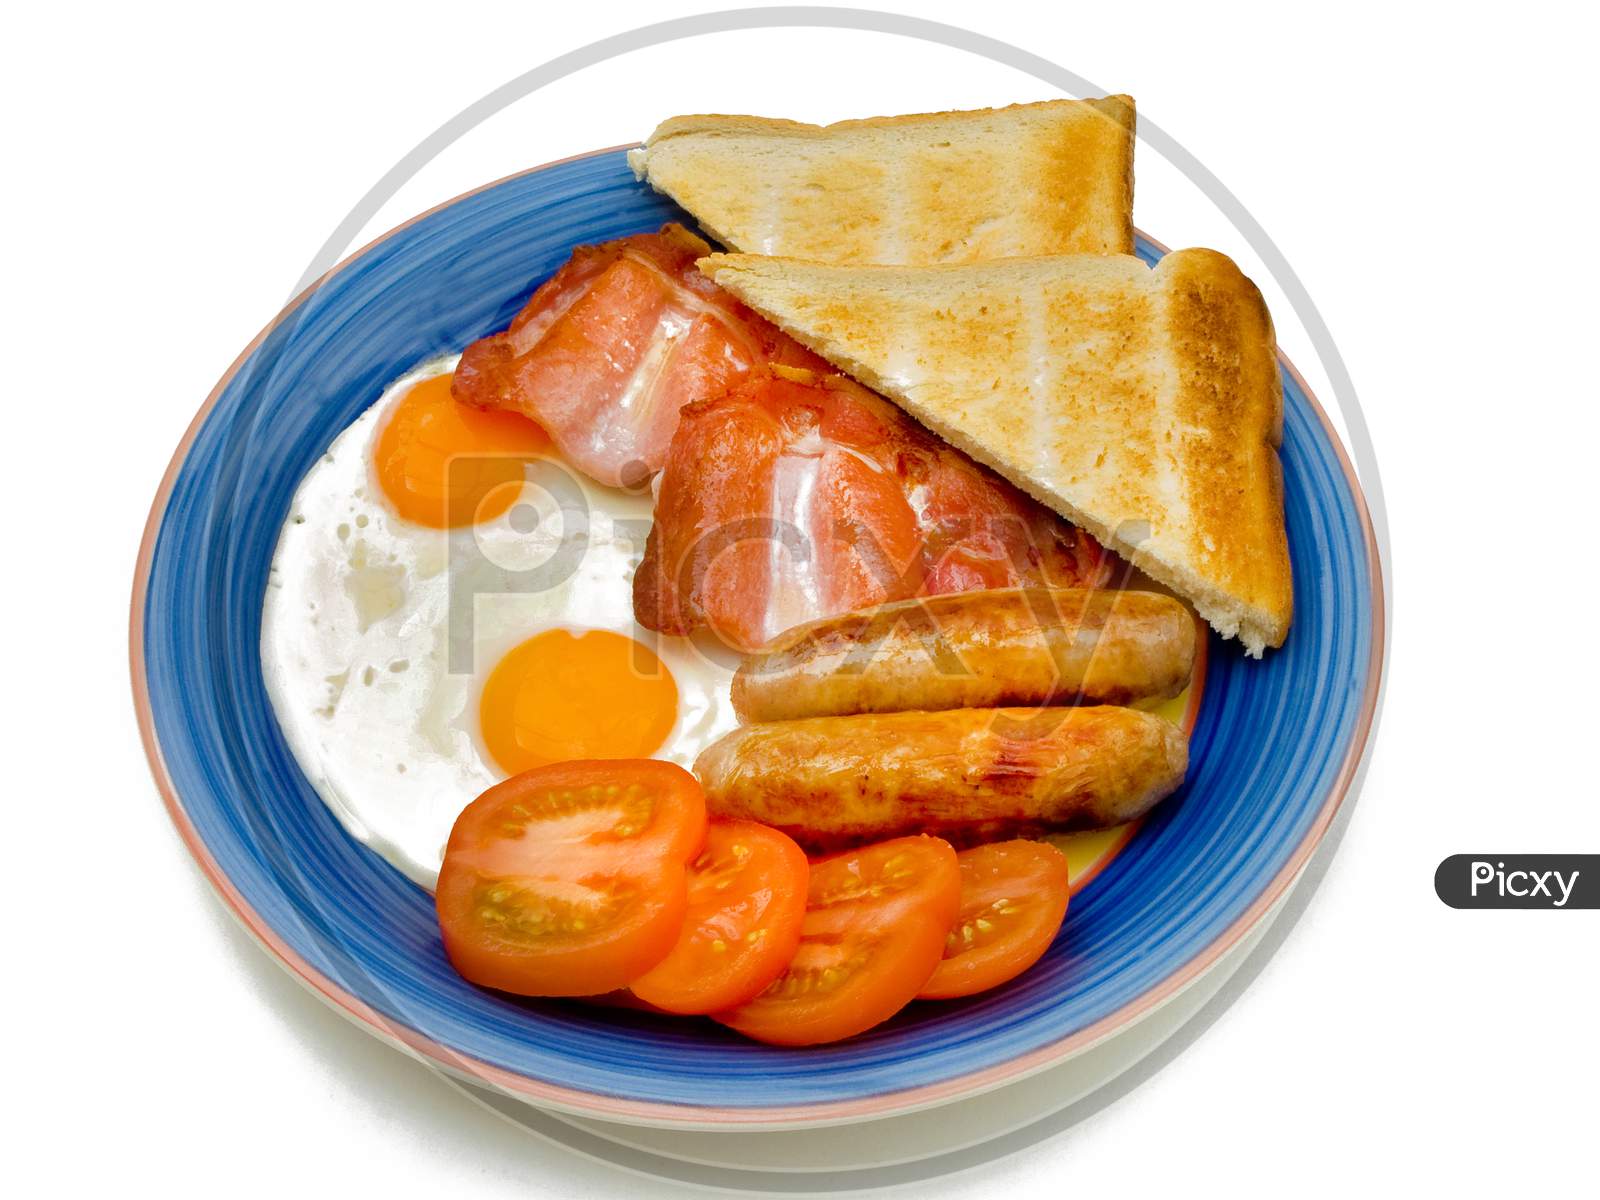 Typical English breakfast with eggs bacon sausage tomatoes and toast.